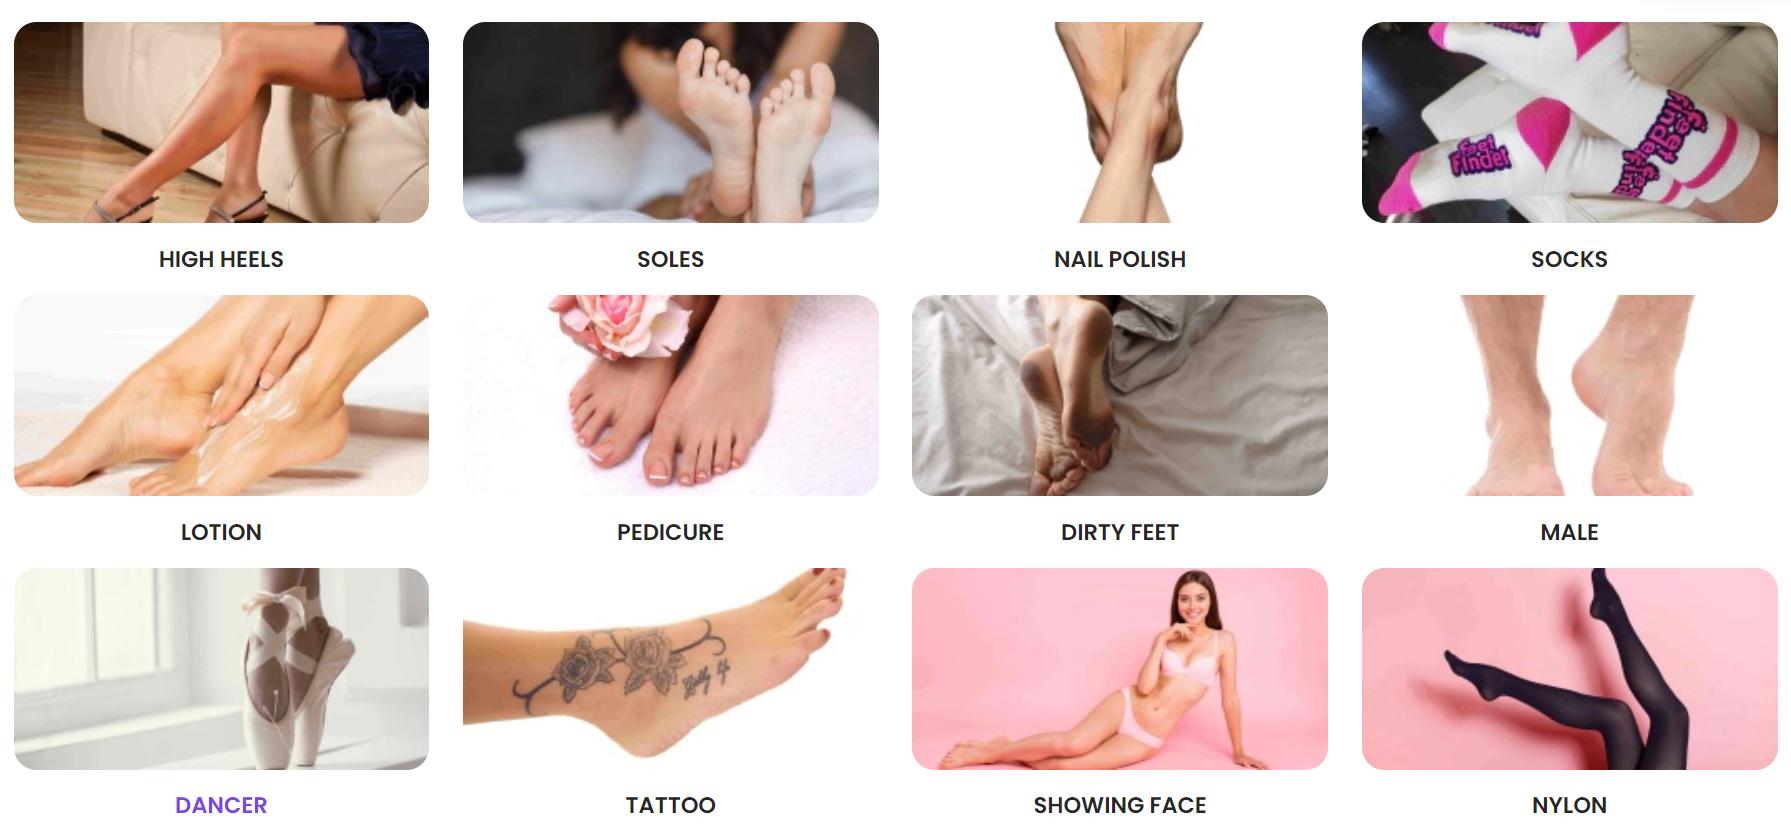 FeetFinder Content Variety- FeetFinder vs FunWithFeet